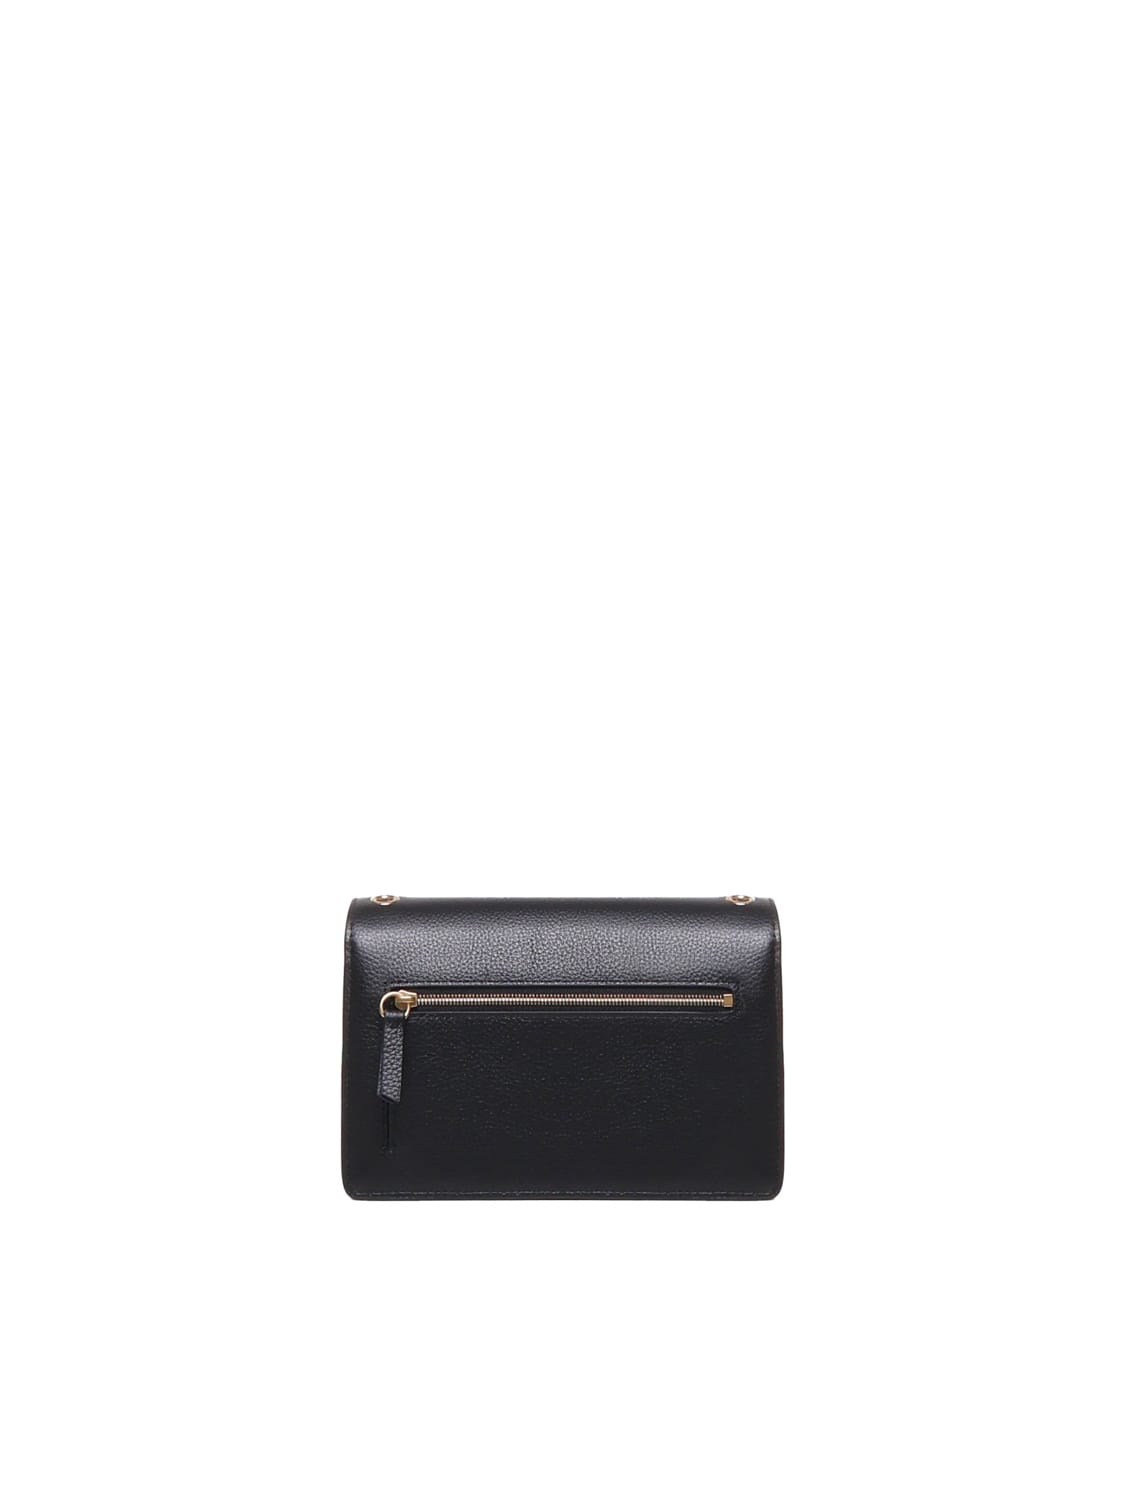 Shop Mulberry Small Darley Leather Bag In Black